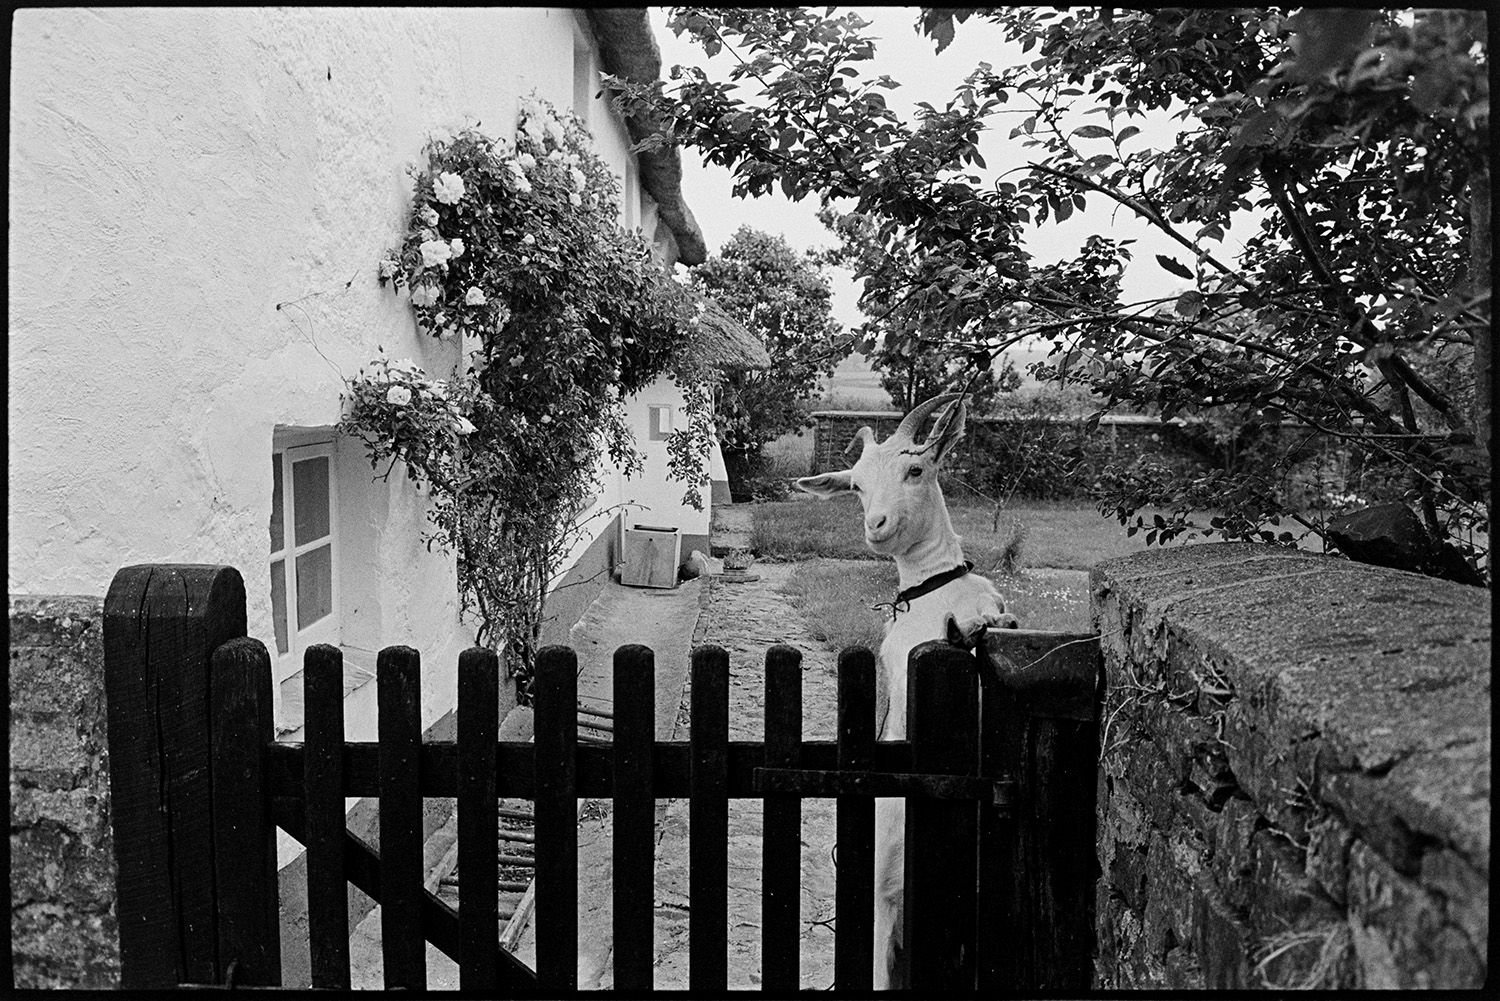 Thatched farmhouse now used as centre for writing studies. Goat at gate. 
[The Arvon Centre at Totleigh Barton, Sheepwash. The thatched farmhouse was used as a creative writing centre. A goat is stood with its front legs on the gate to the farmhouse. A rose bush is also growing up the farmhouse wall.]